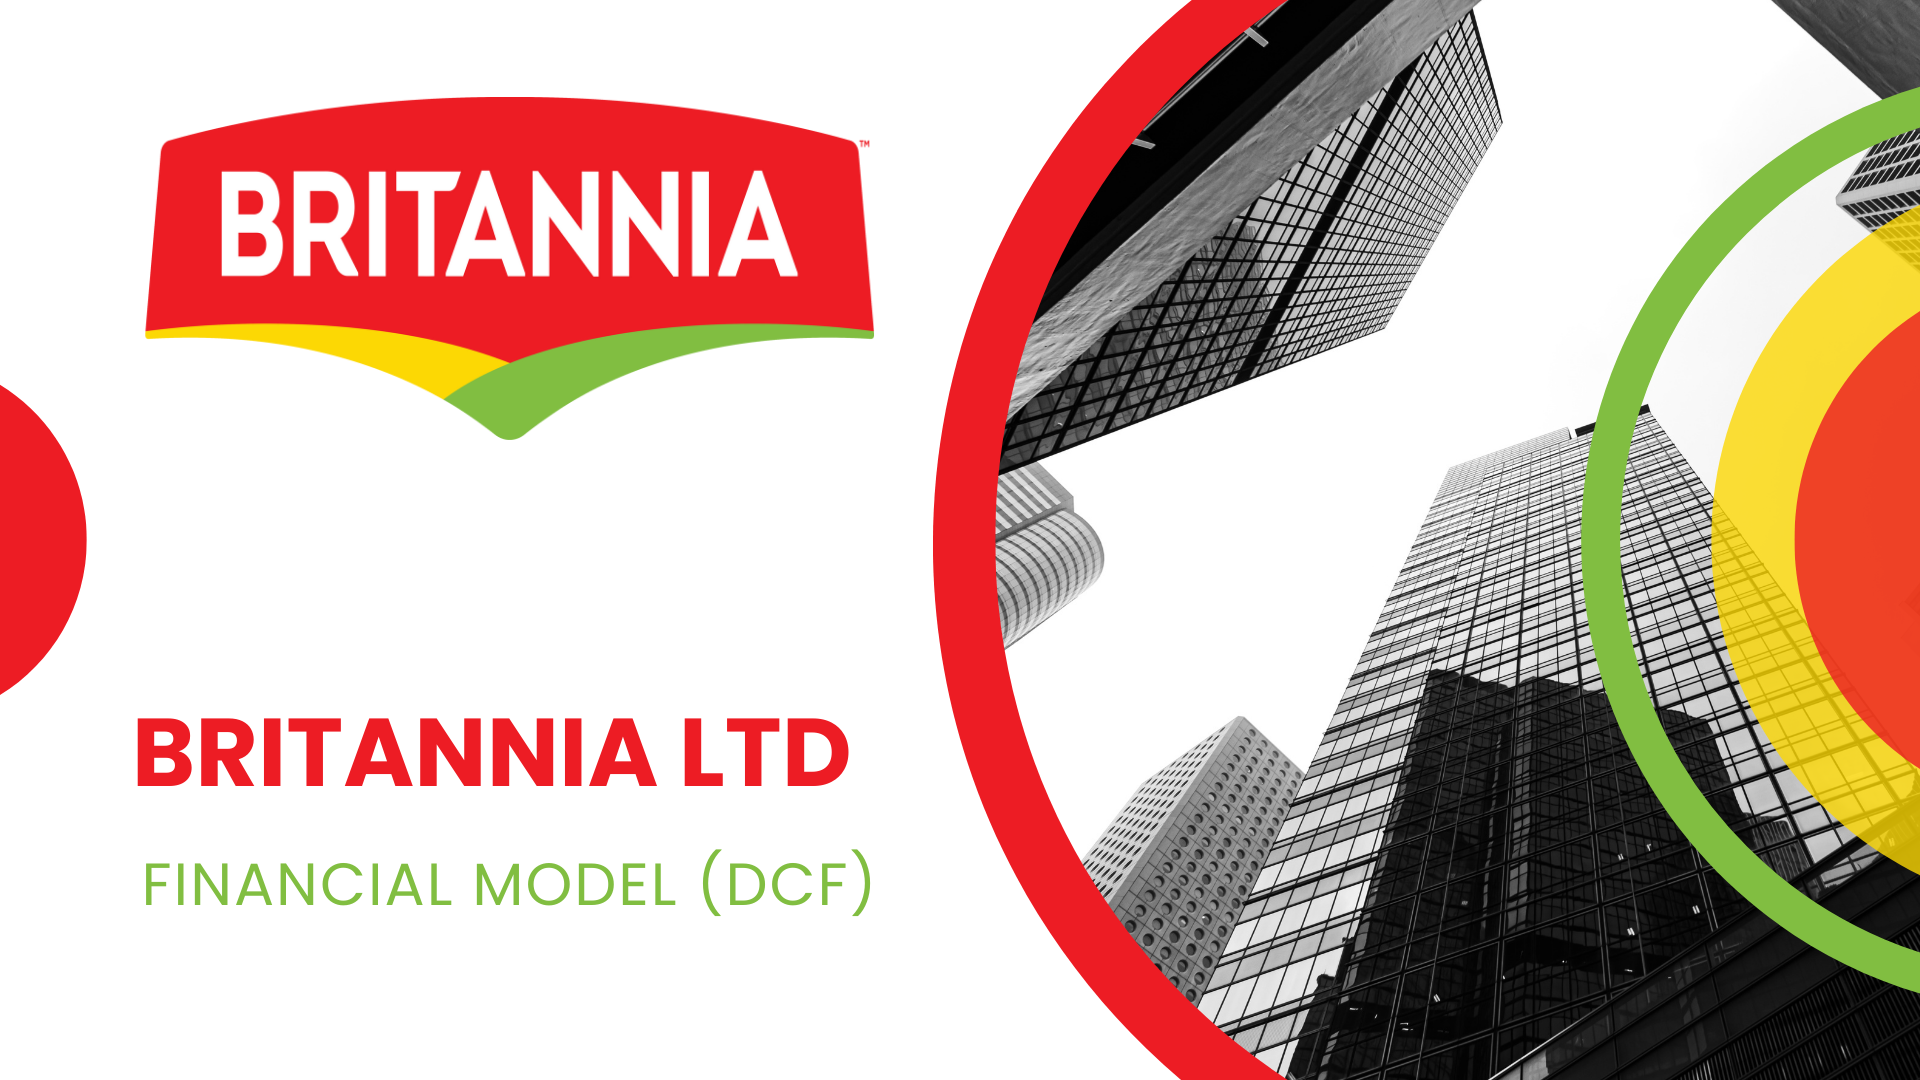 UNDERSTAND-THE-BRITANNIA-INDUSTRIES-LIMITED-FINANCIAL-MODELING-ASPECT